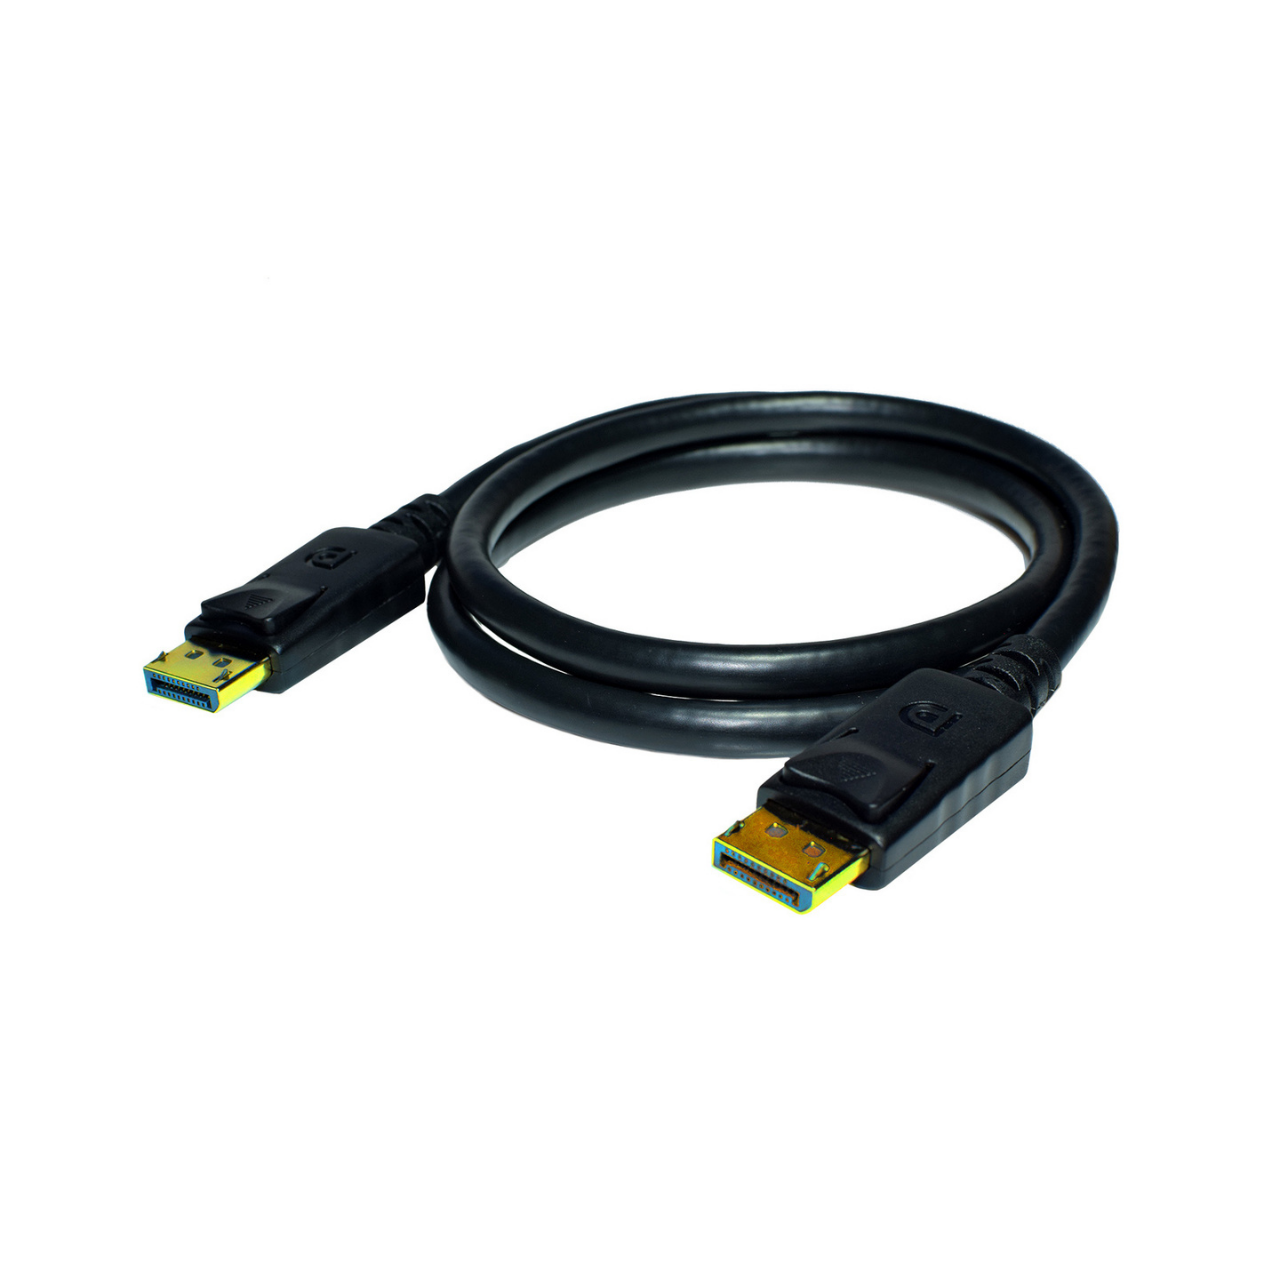 Winston Display Port Male to Male Cable 6 Foot